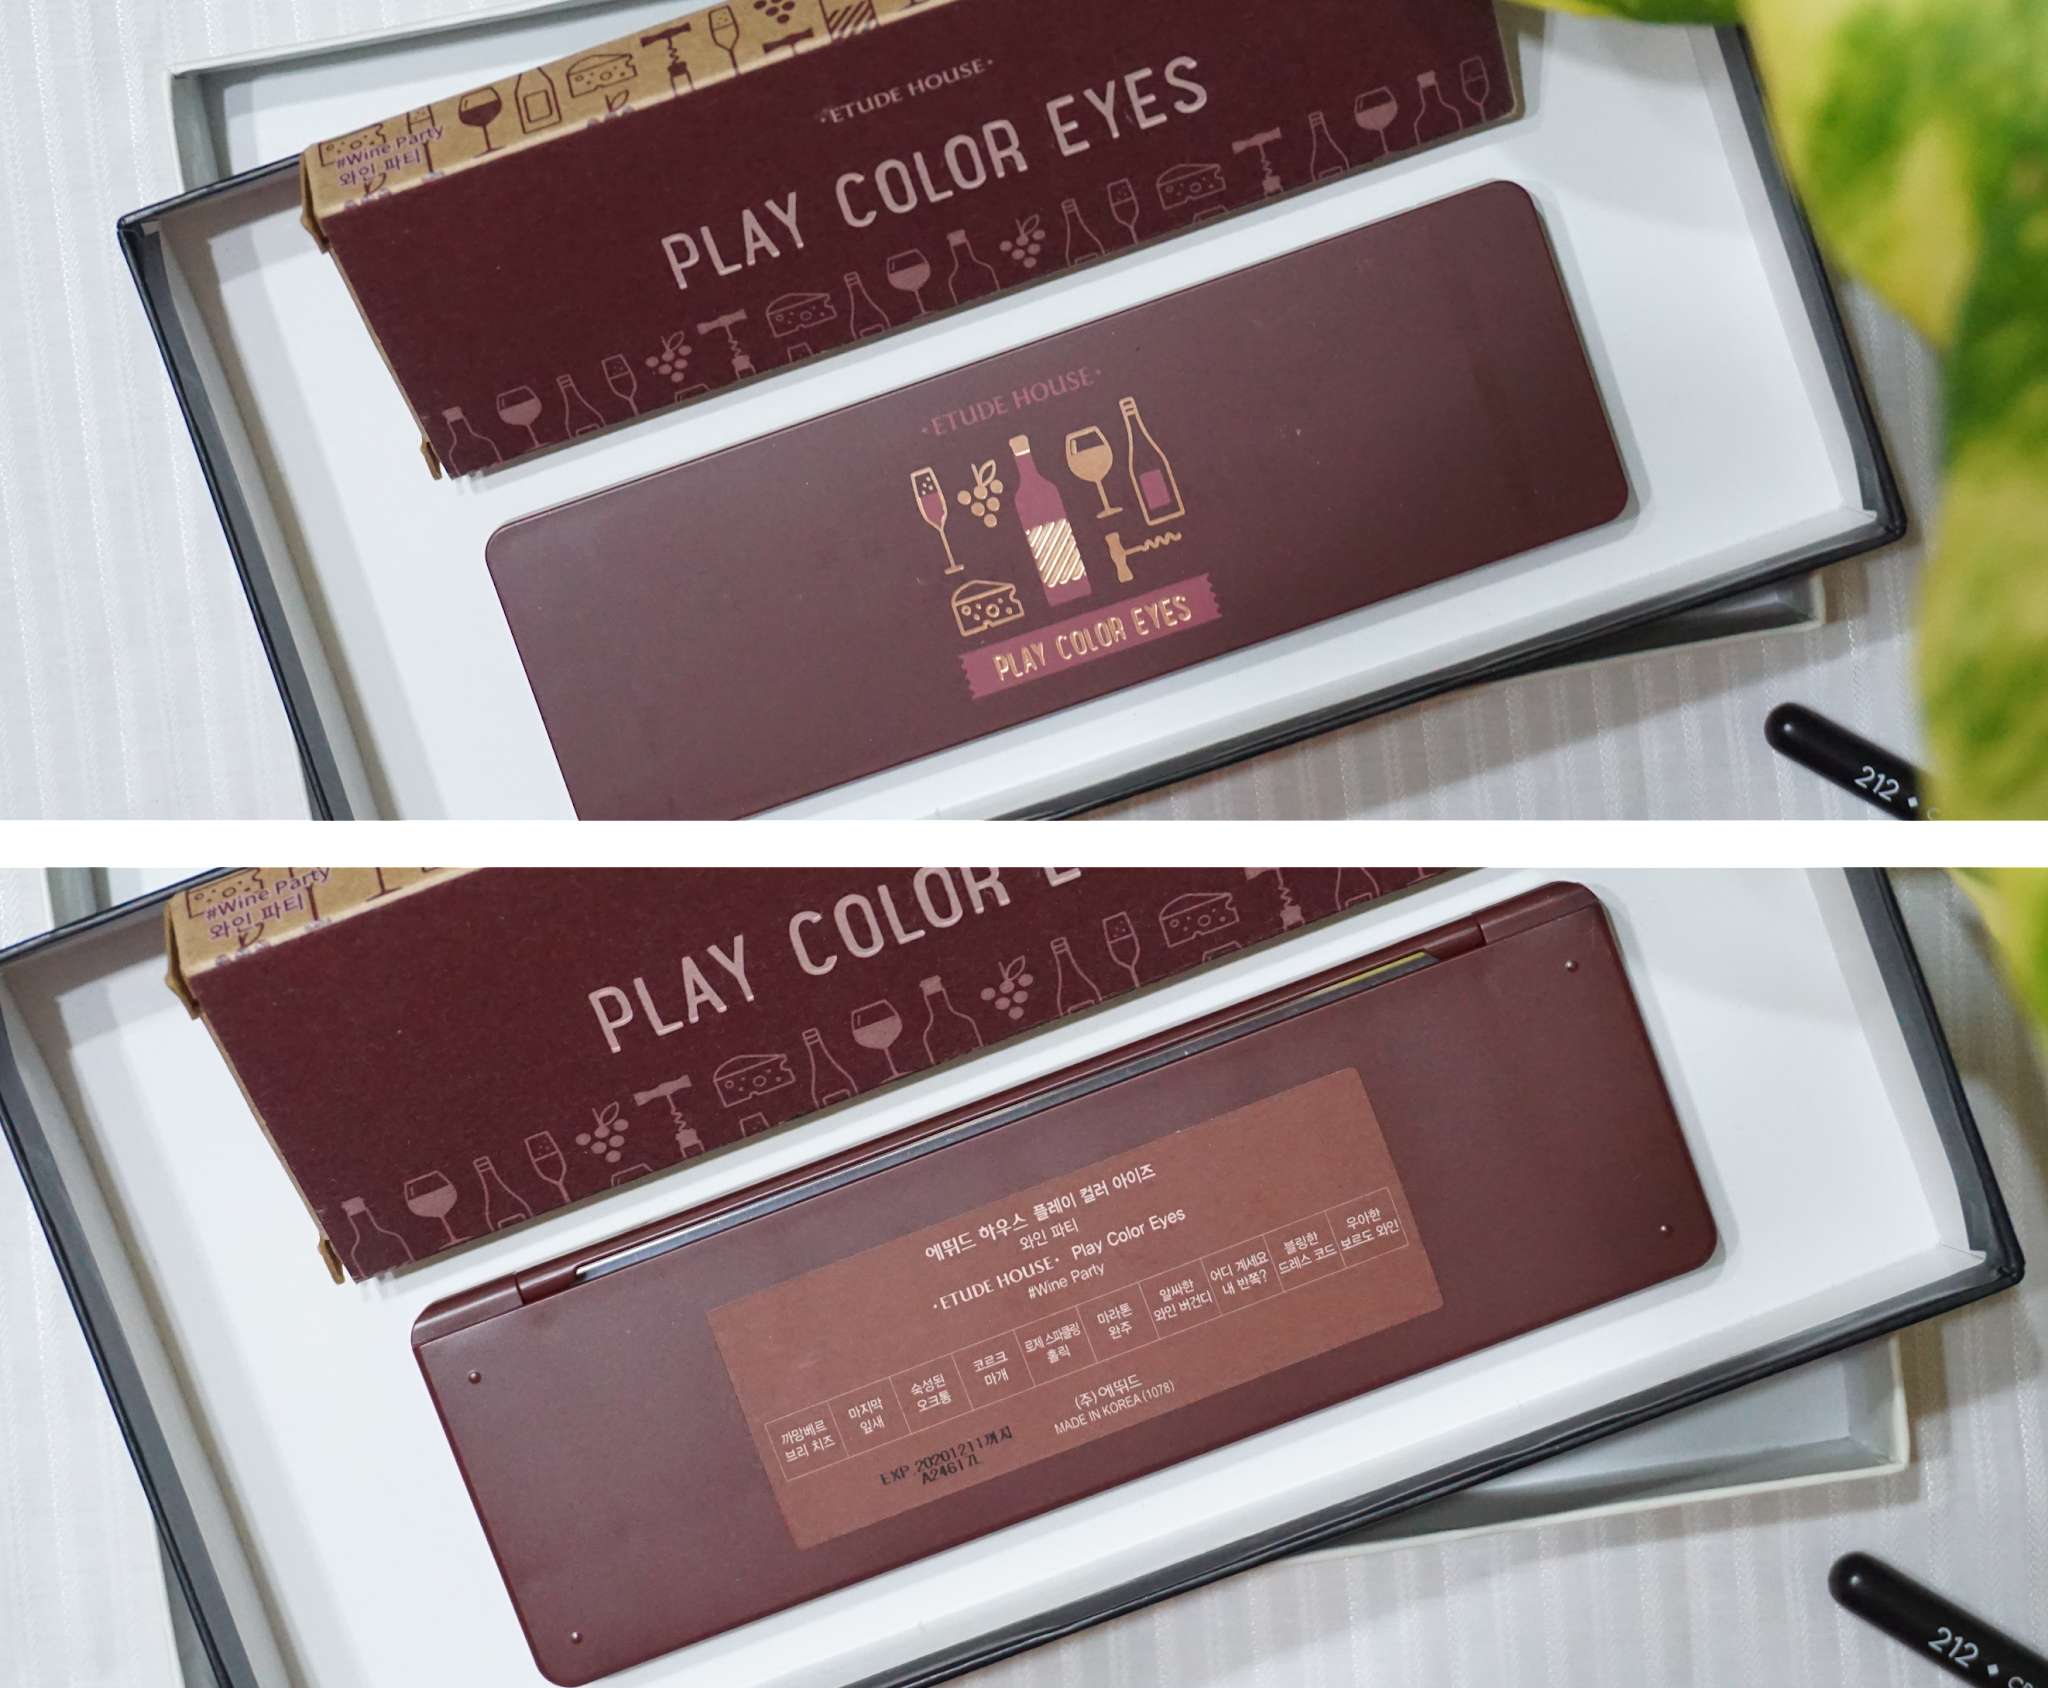 Review Etude House Play Color Eyes Wine Party Eyeshadow Palette